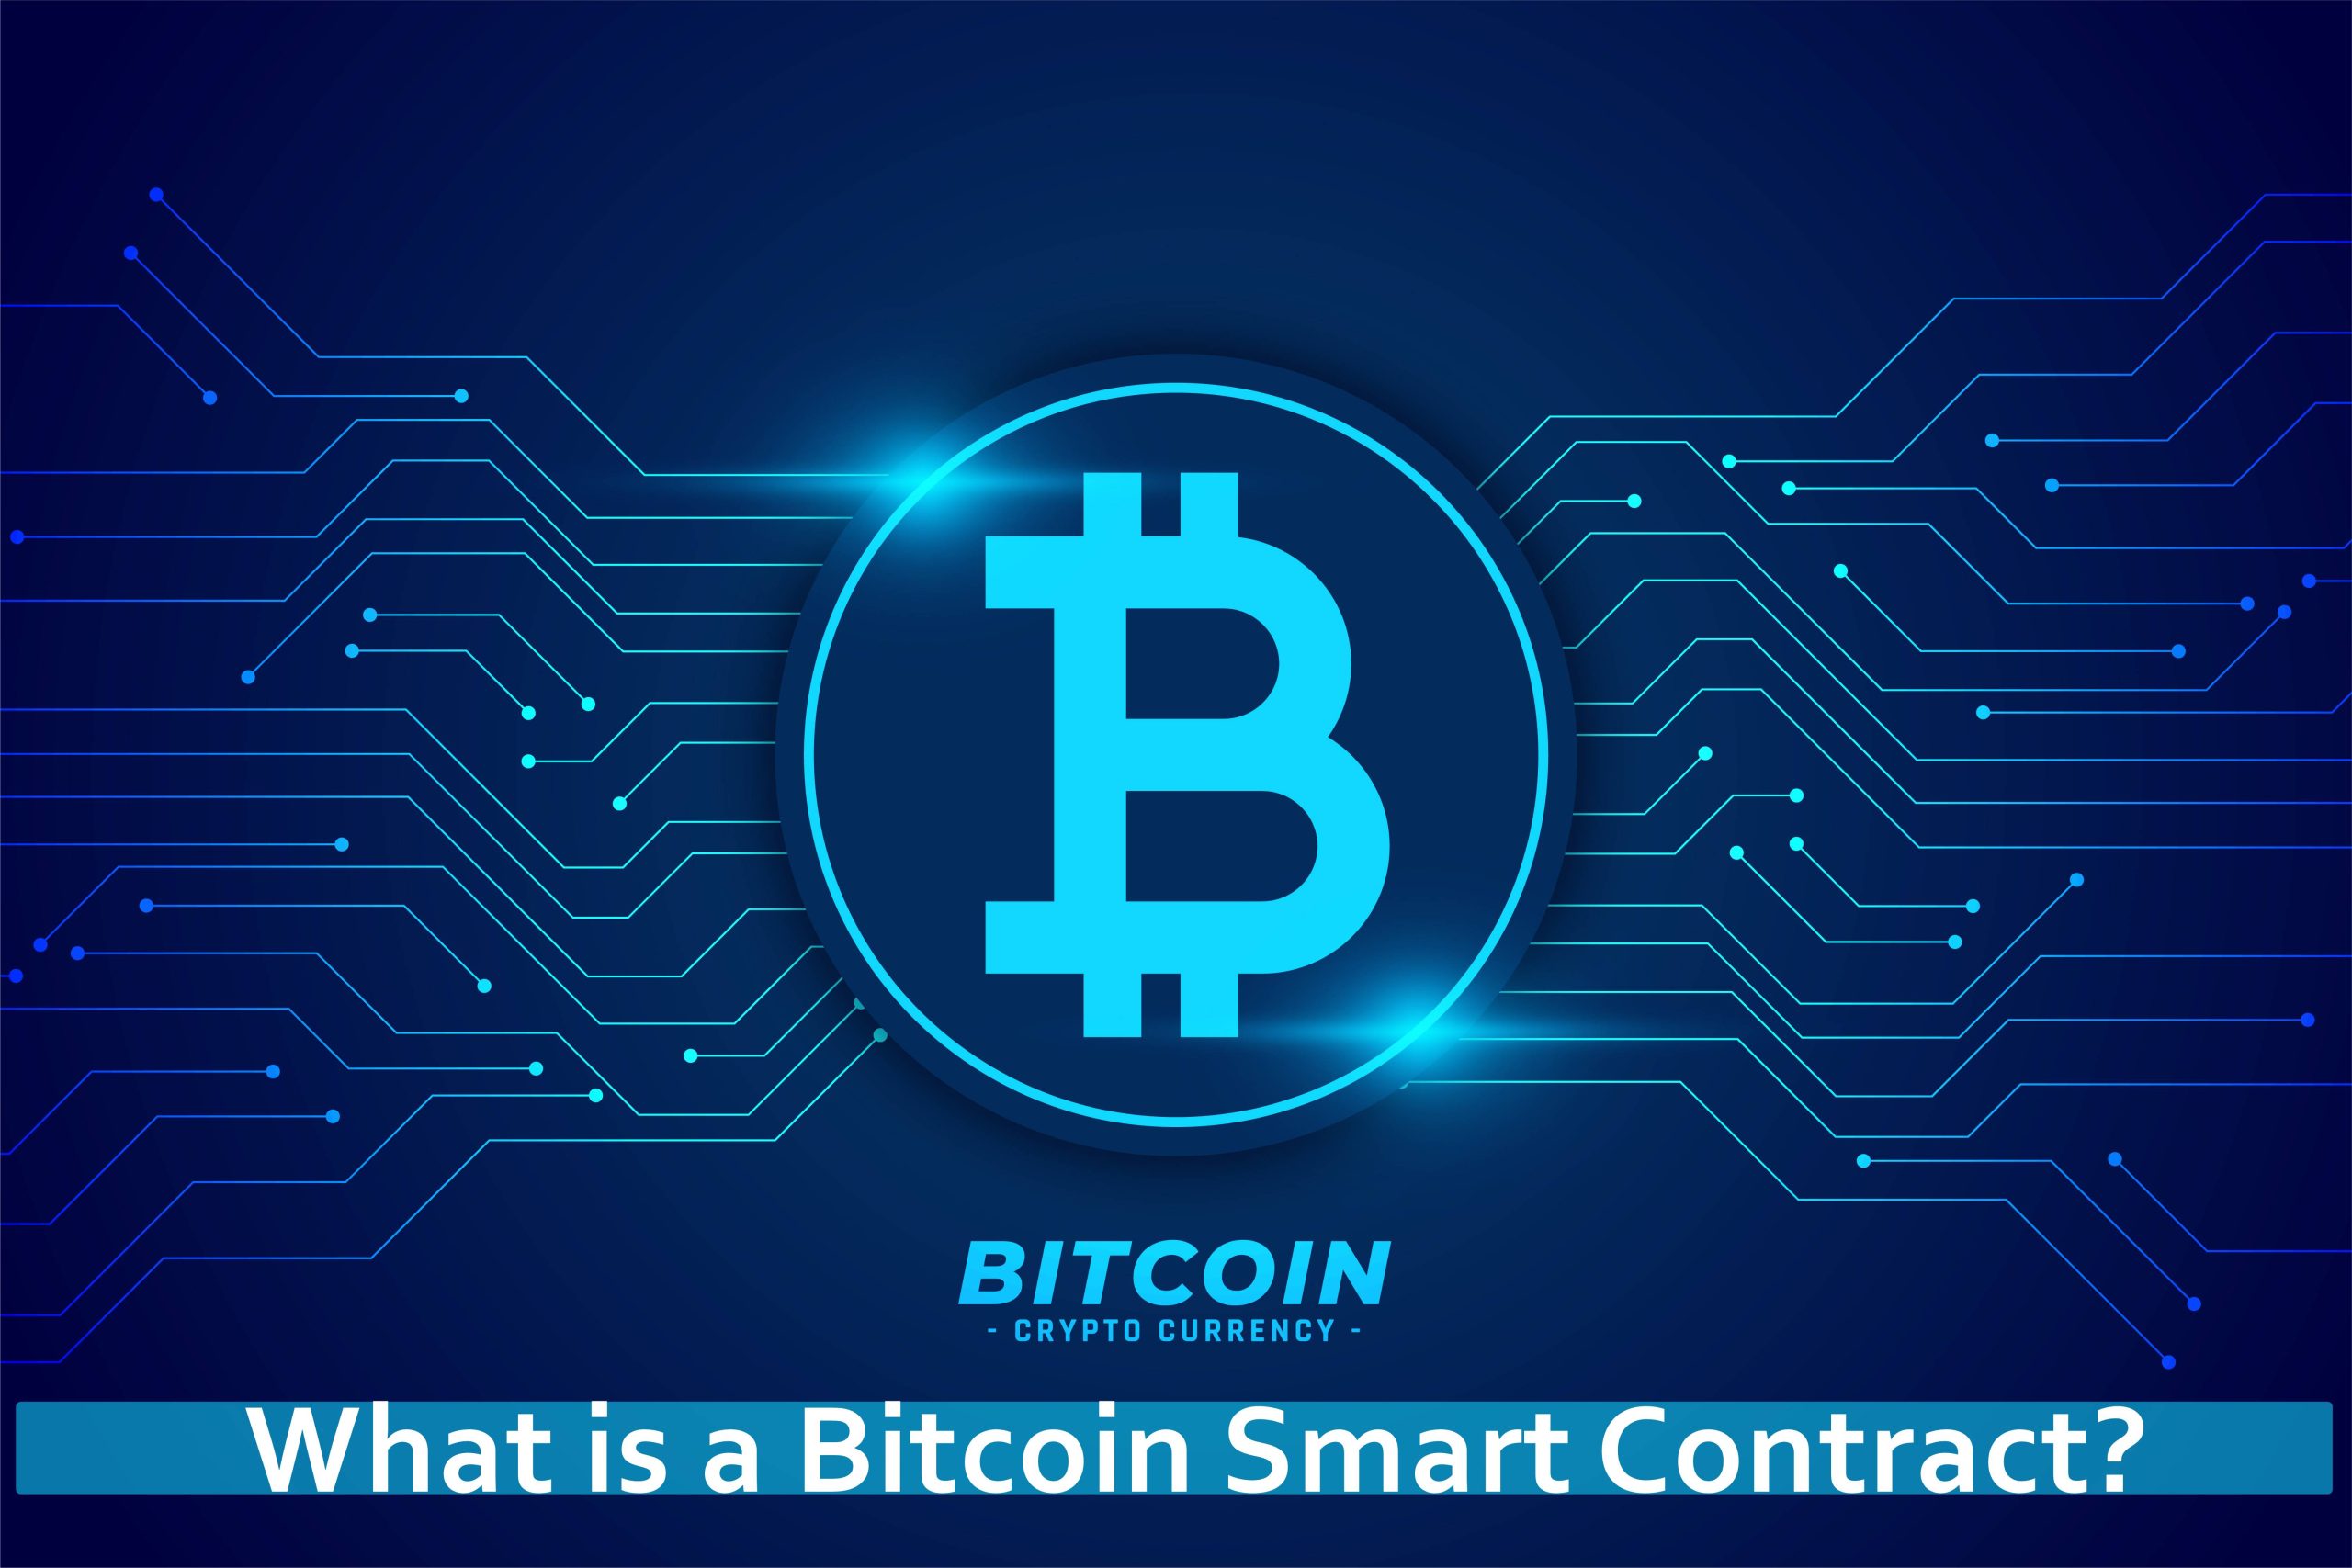 What is a Bitcoin Smart Contract